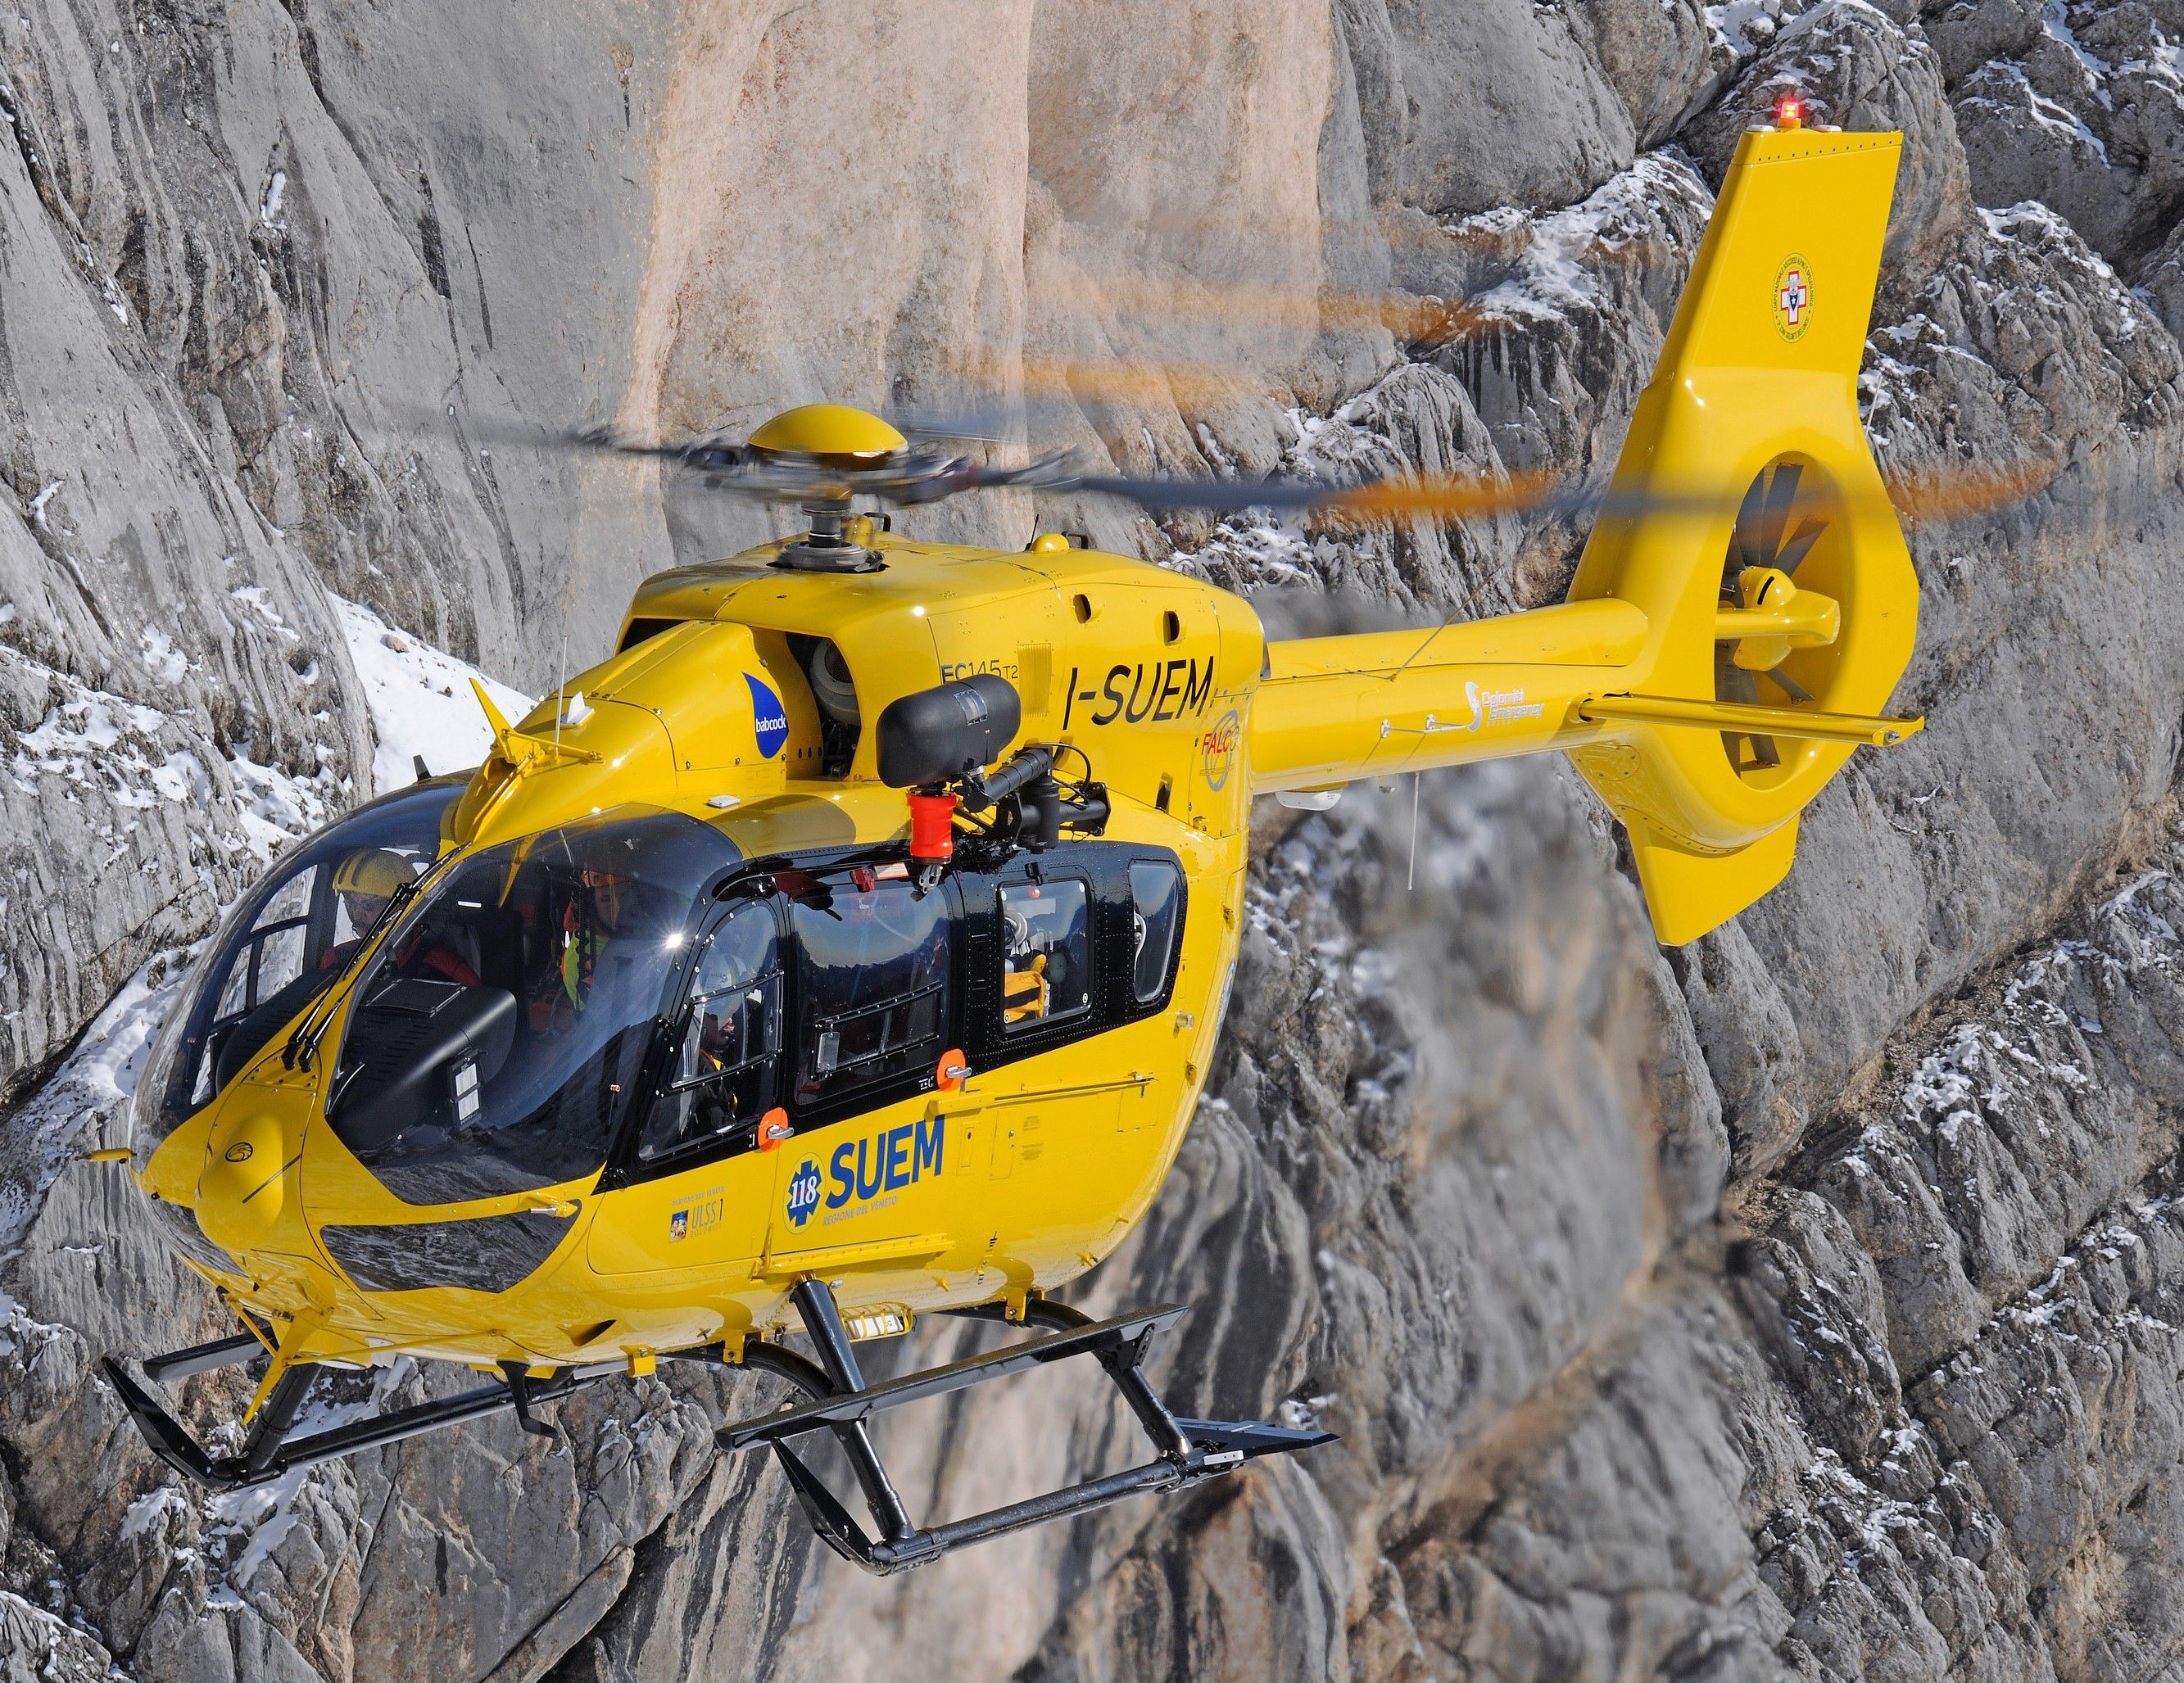 The new H145 aircraft